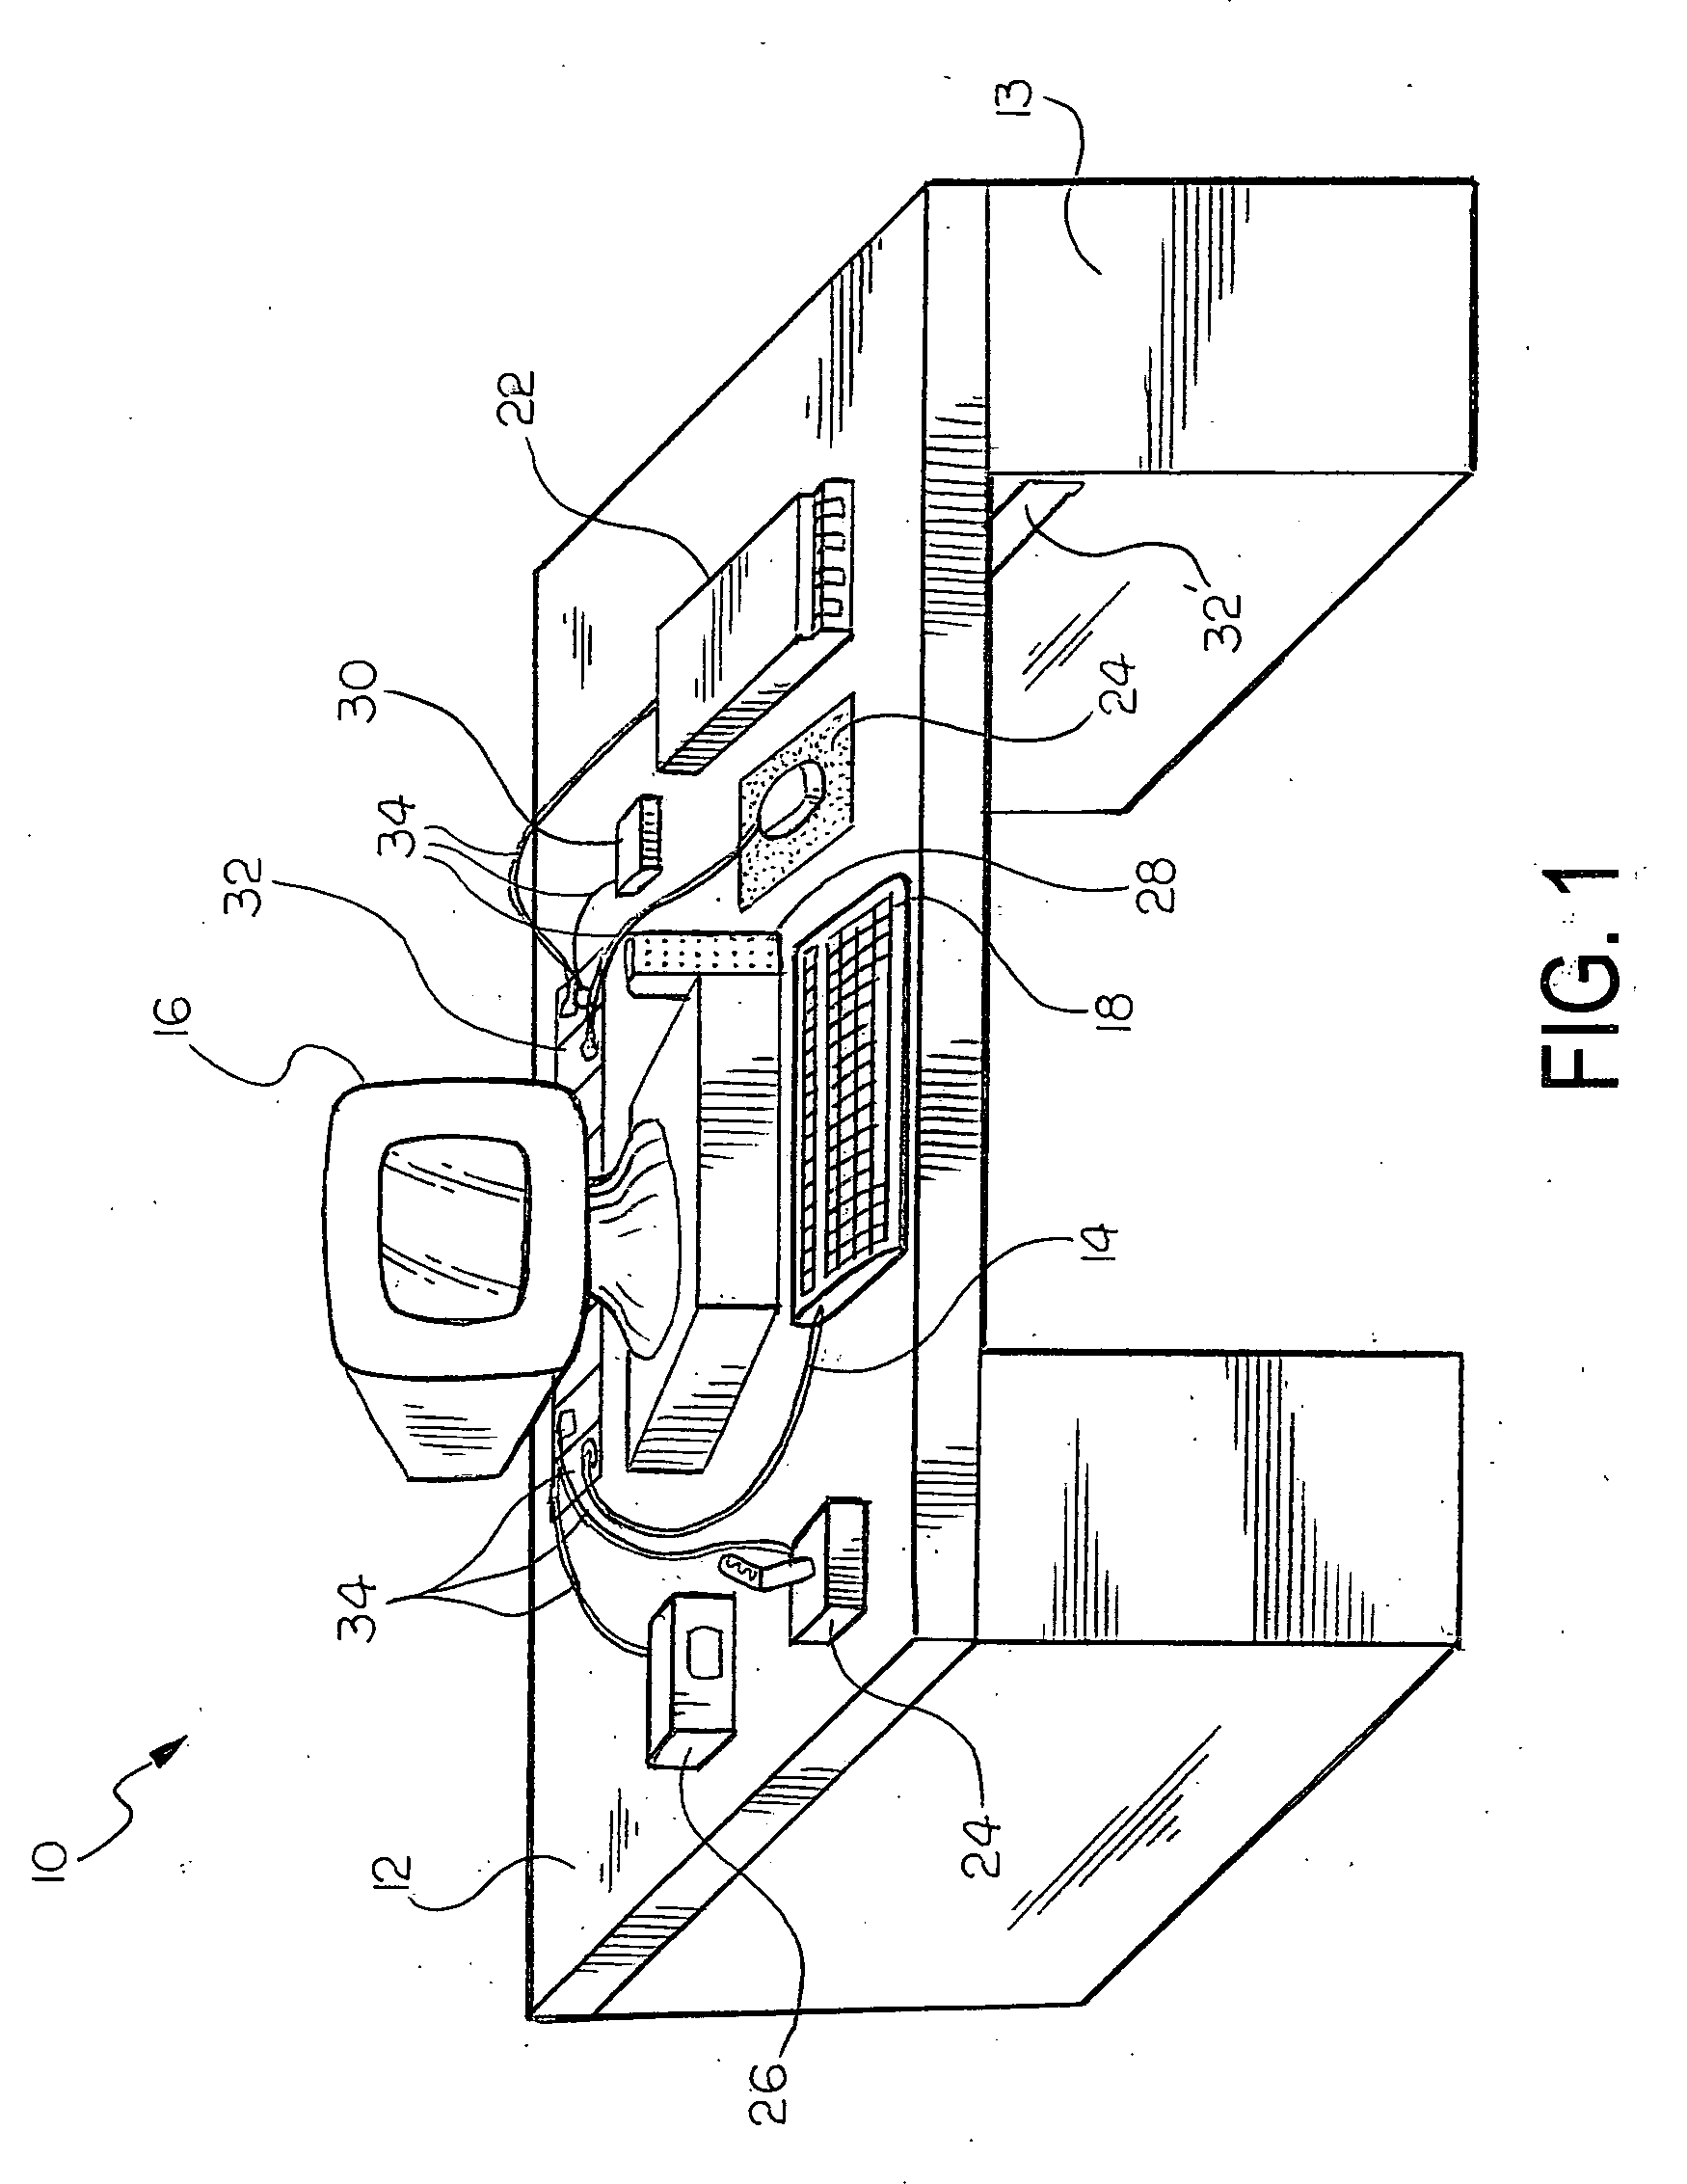 Desk mounted power and accessory outlet apparatus